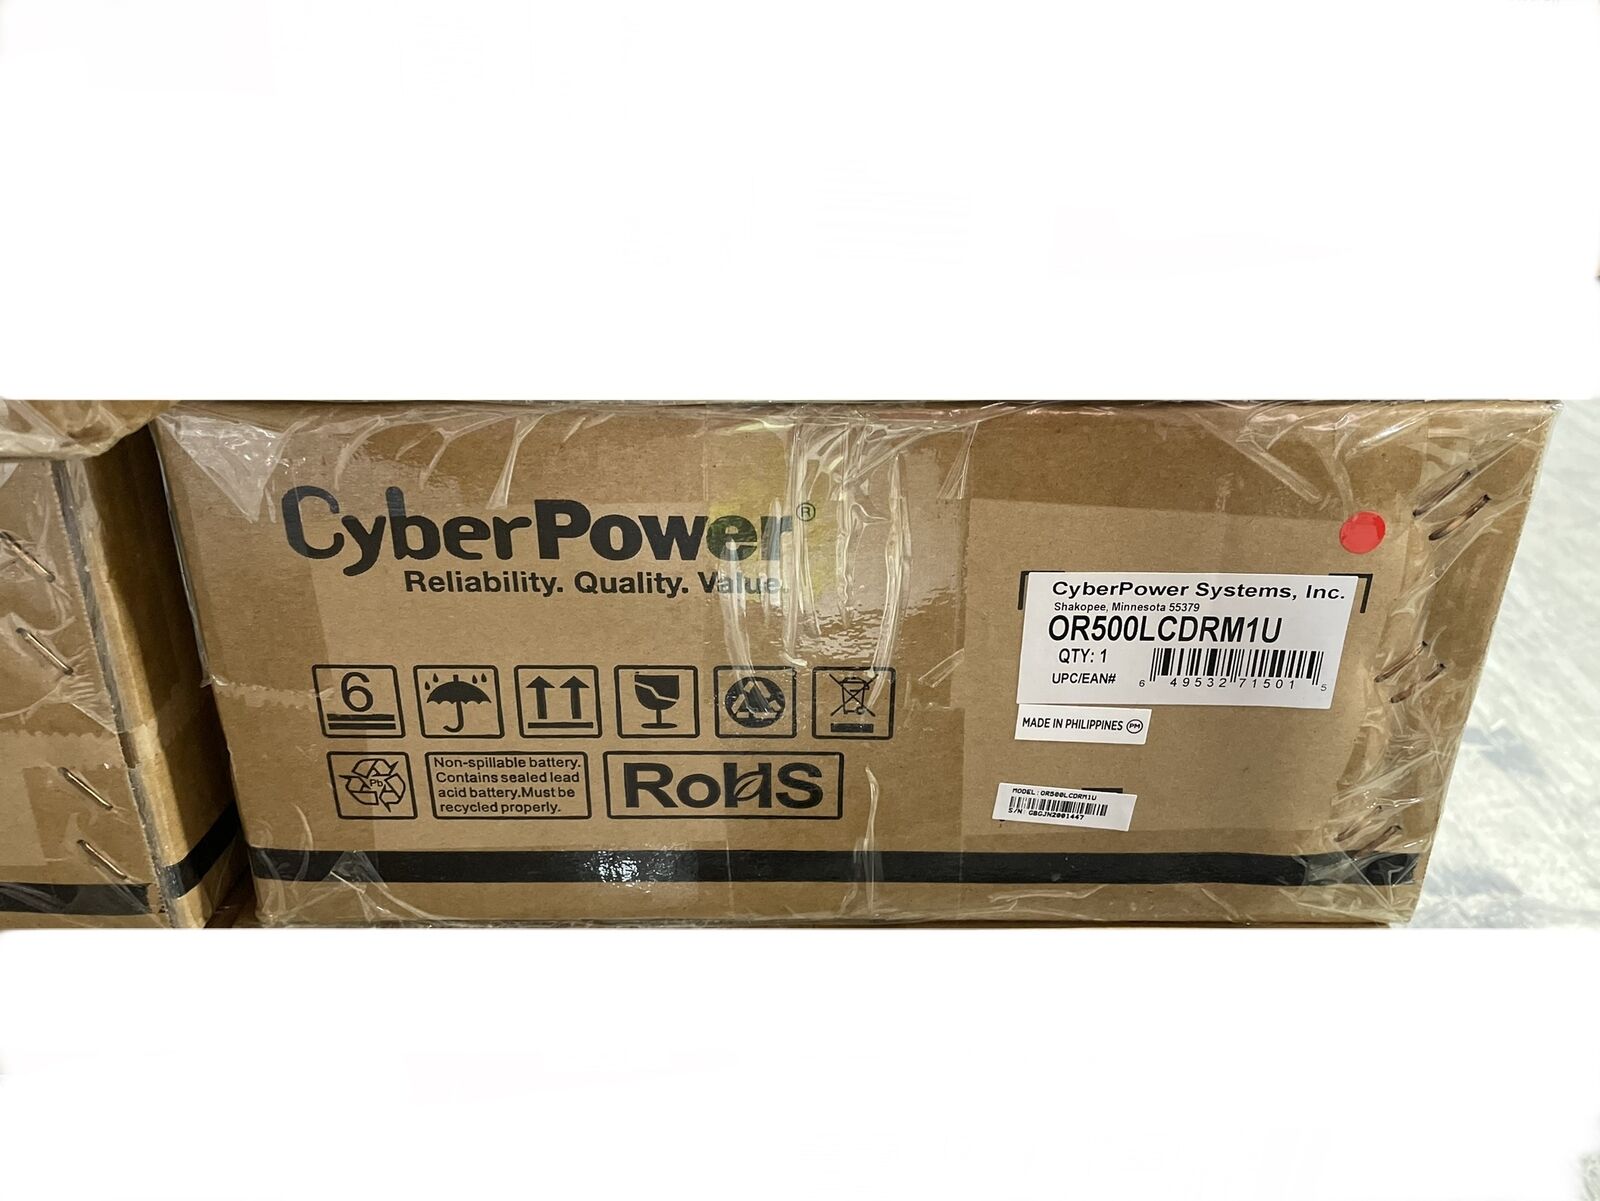 NEW CYBERPOWER OR500LCDRM1U OFFICE RACKMOUNT LCD SERIES 500VA UPS 6-OUTLETS